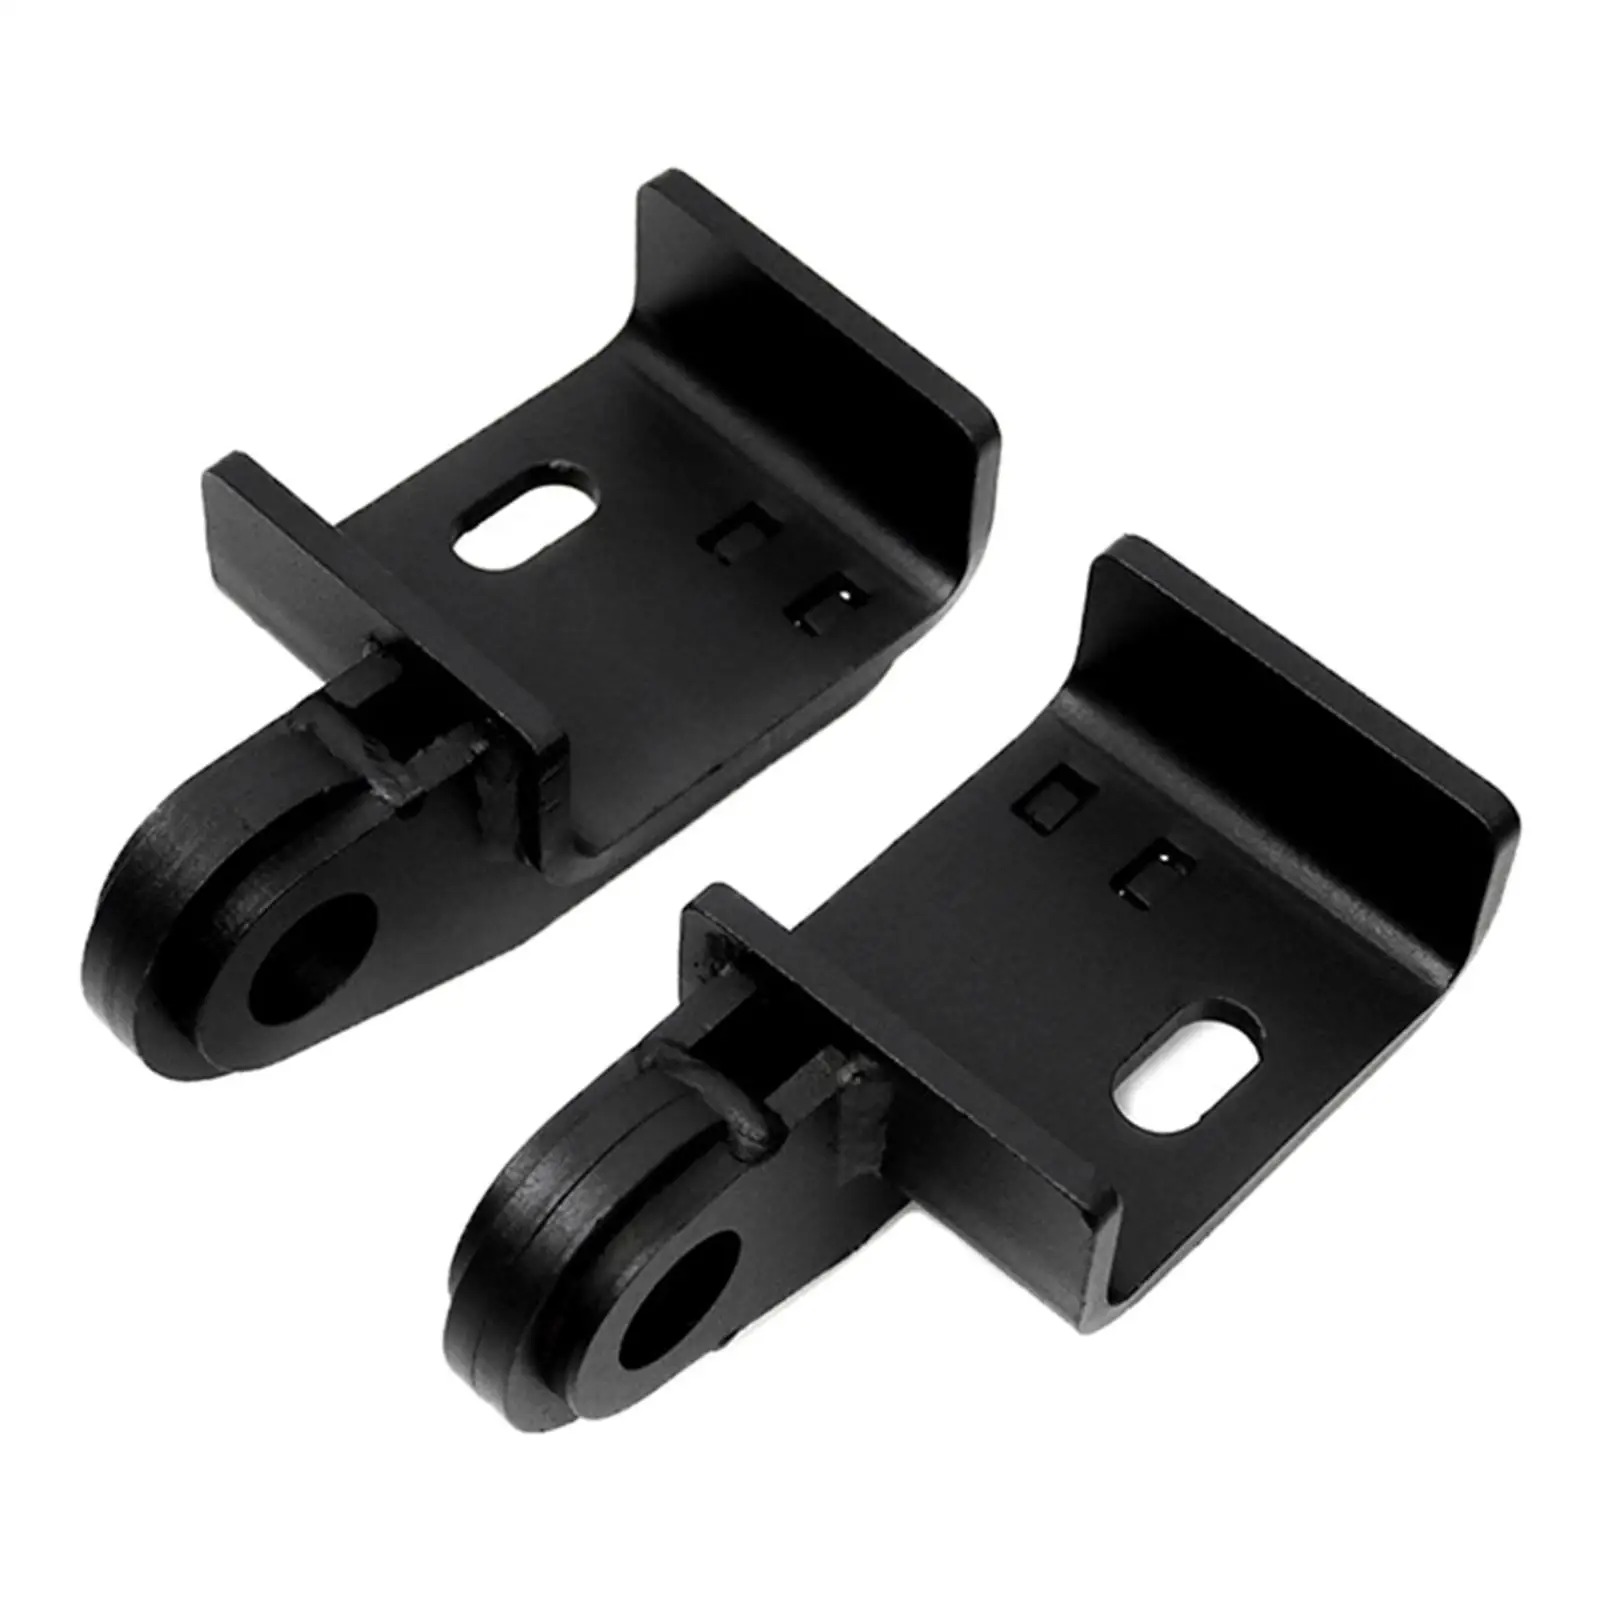 2x Auto Front Tow Hook Mounting Bracket Front Bumper Relocator Mount Adapter D Ring Shackle Bracket for Metal Sturdy